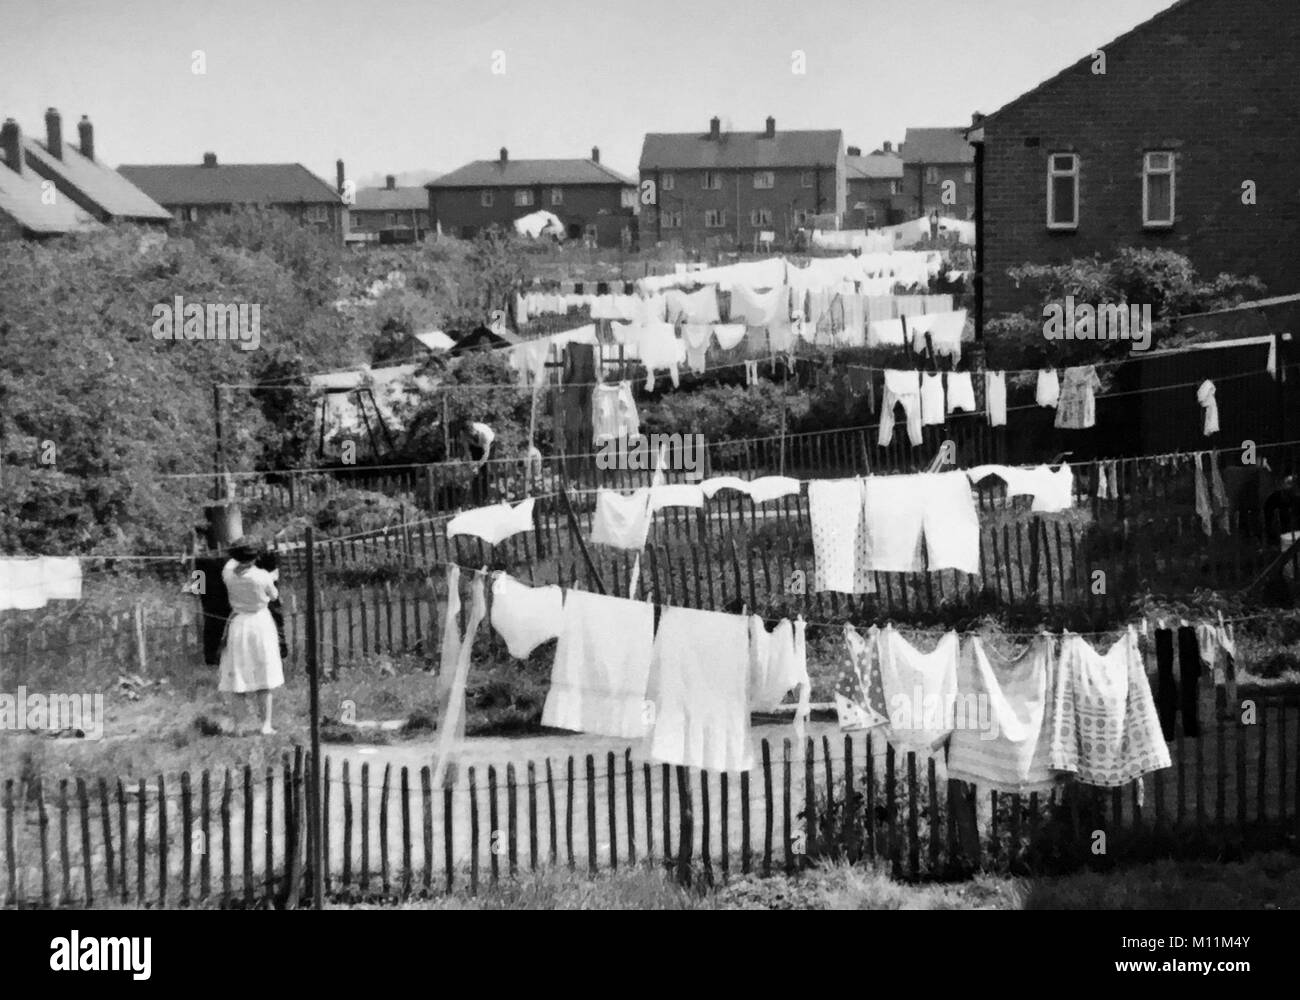 Washing hanging on the line 'washing day' Britain 1950s Stock Photo